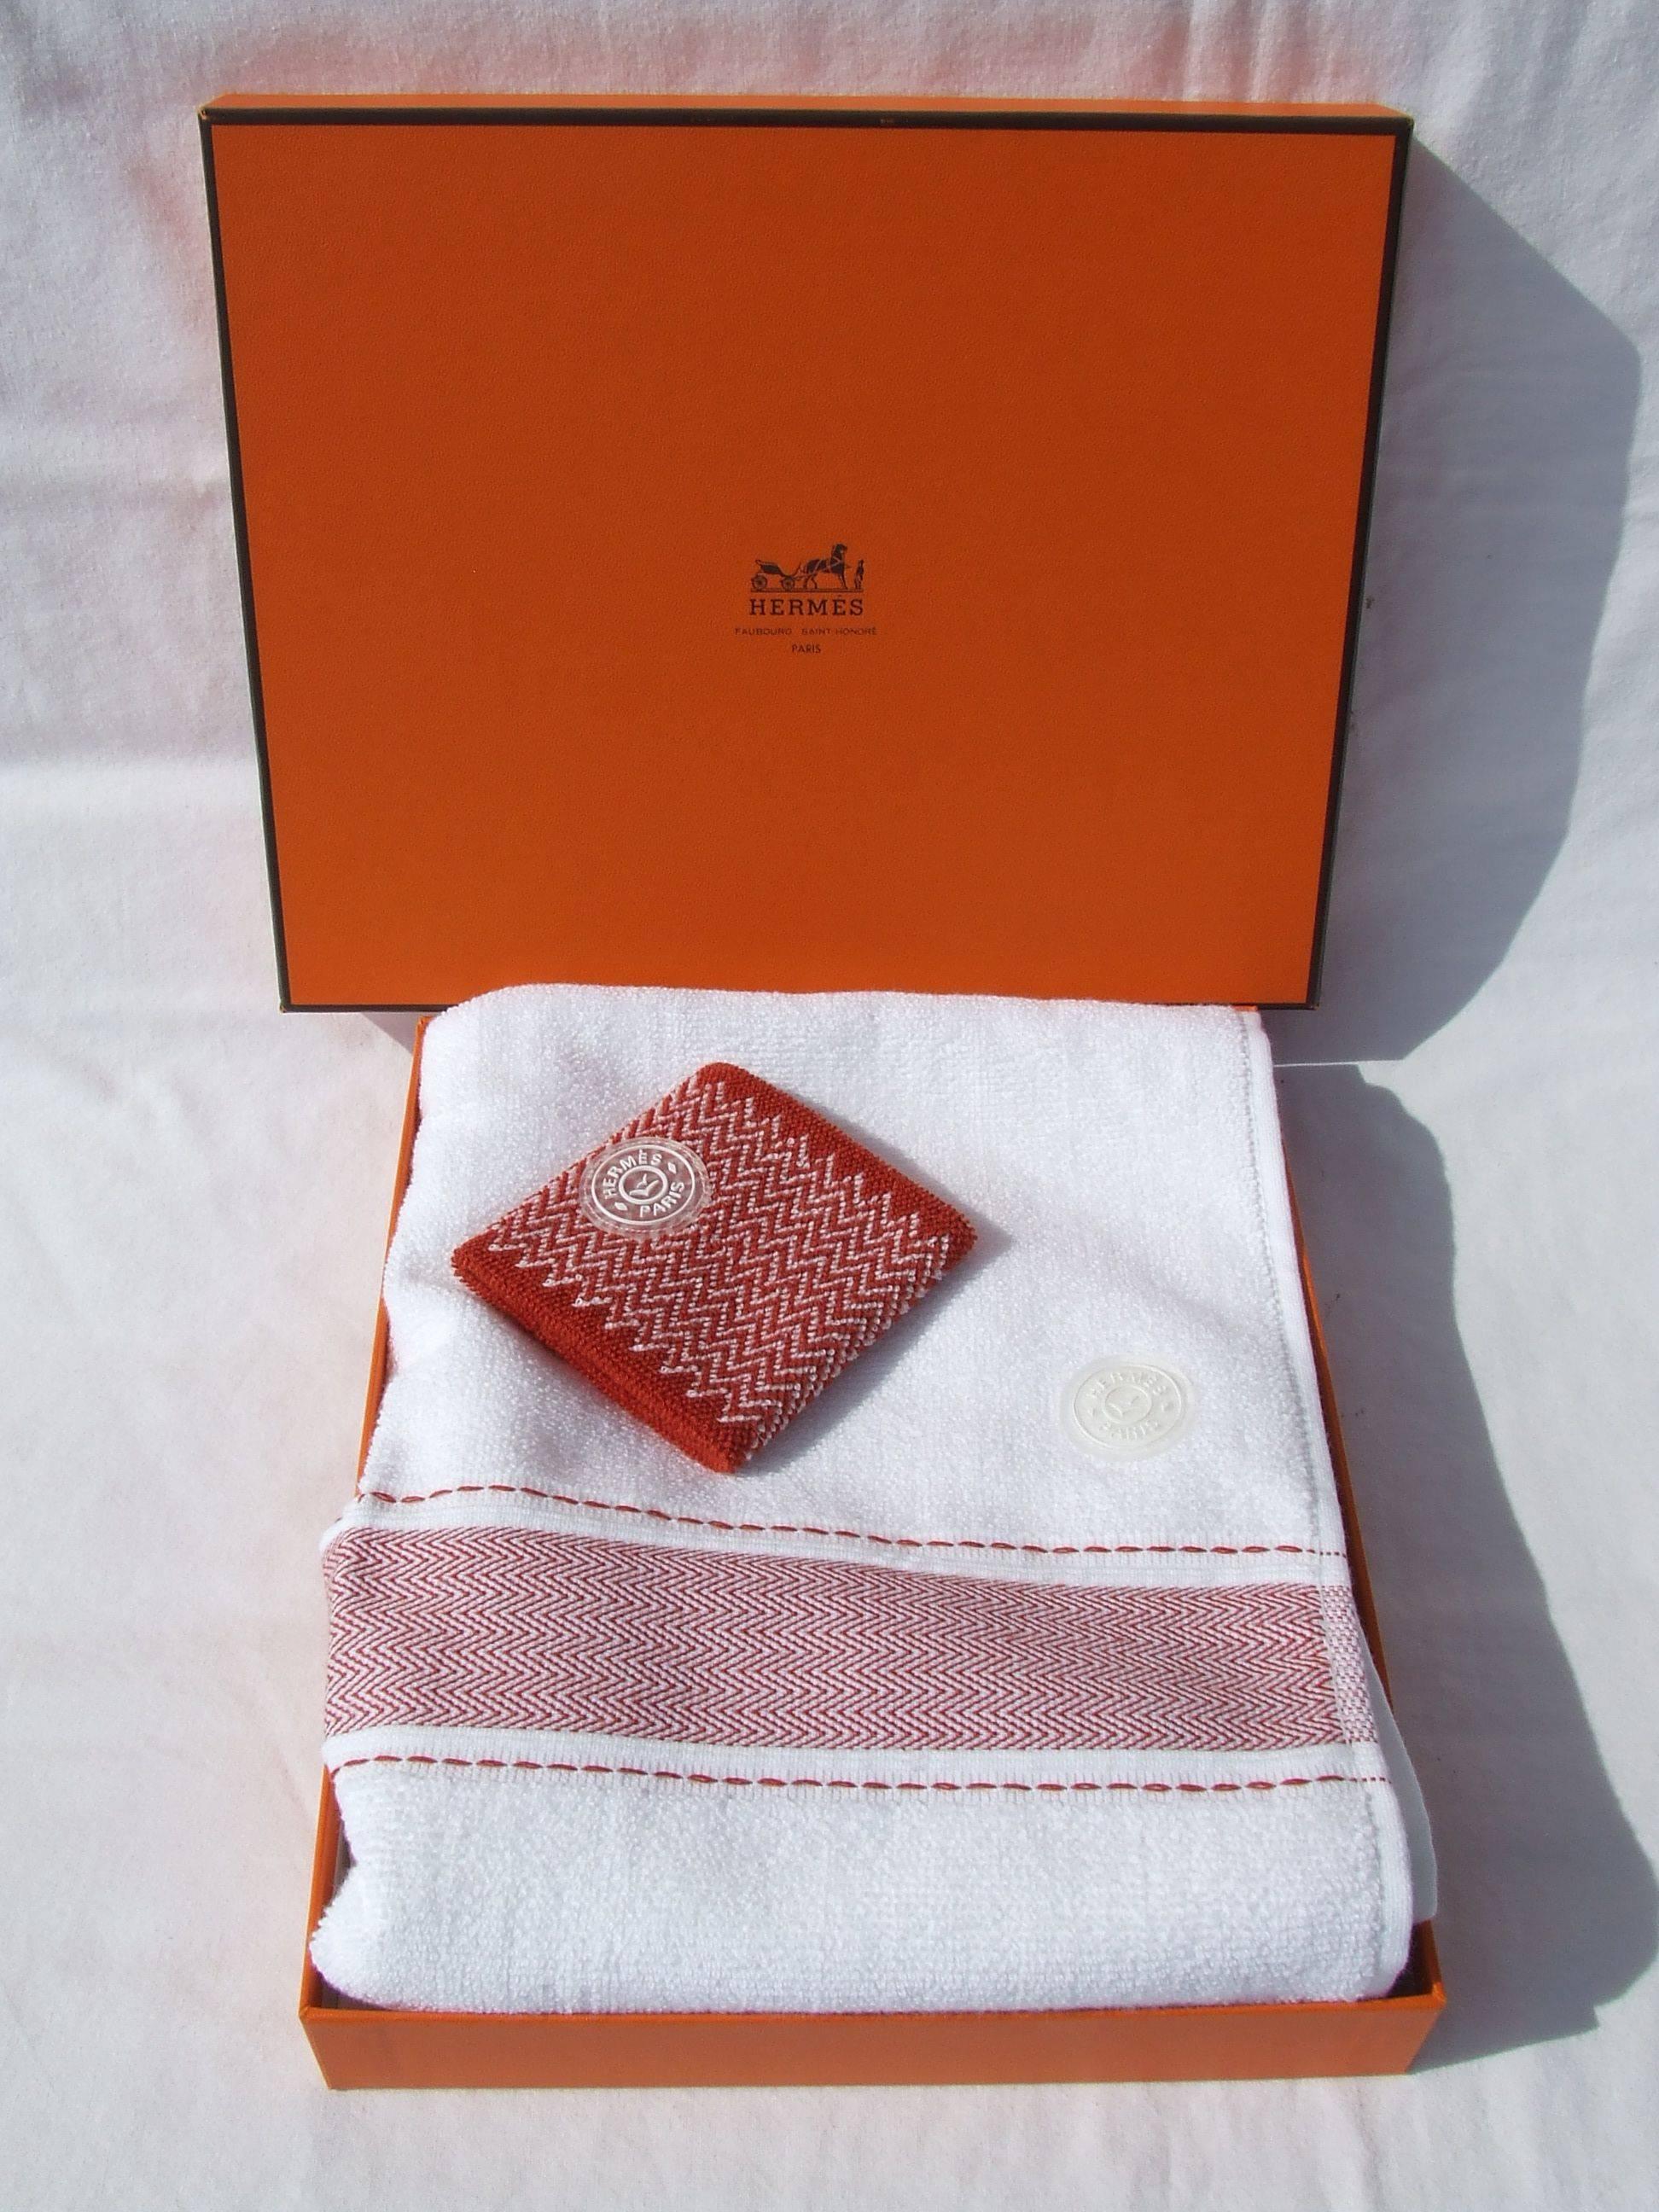 Hermès Set of Sports Towel and Sweatband Tennis Combed Cotton  3